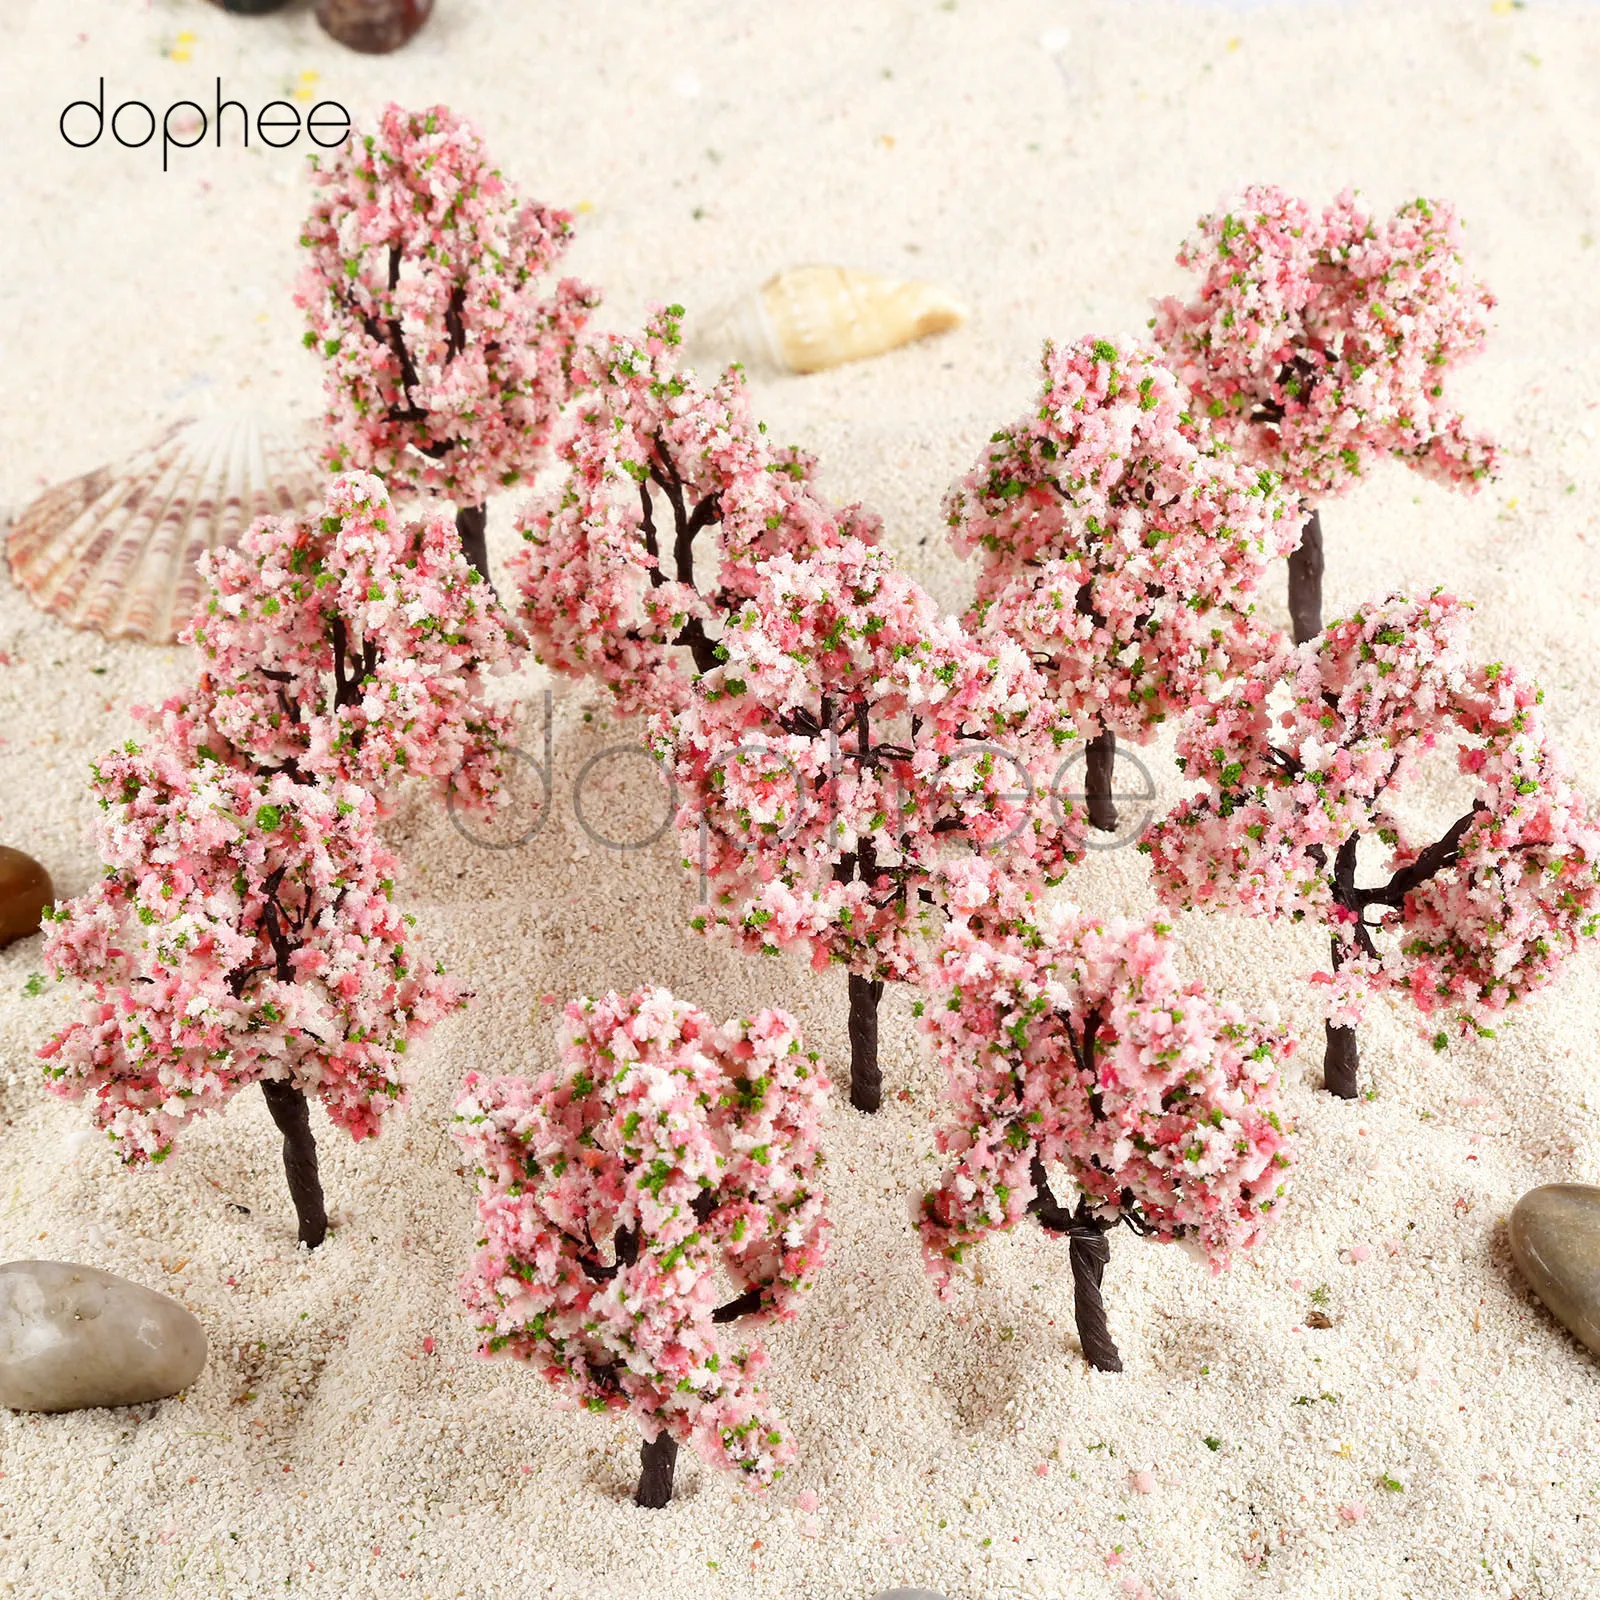 

dophee 10pcs model tree with pink flowers 11cm Trees Landscape OO HO Scale for Railroad Scenery scale mini Garden decoration